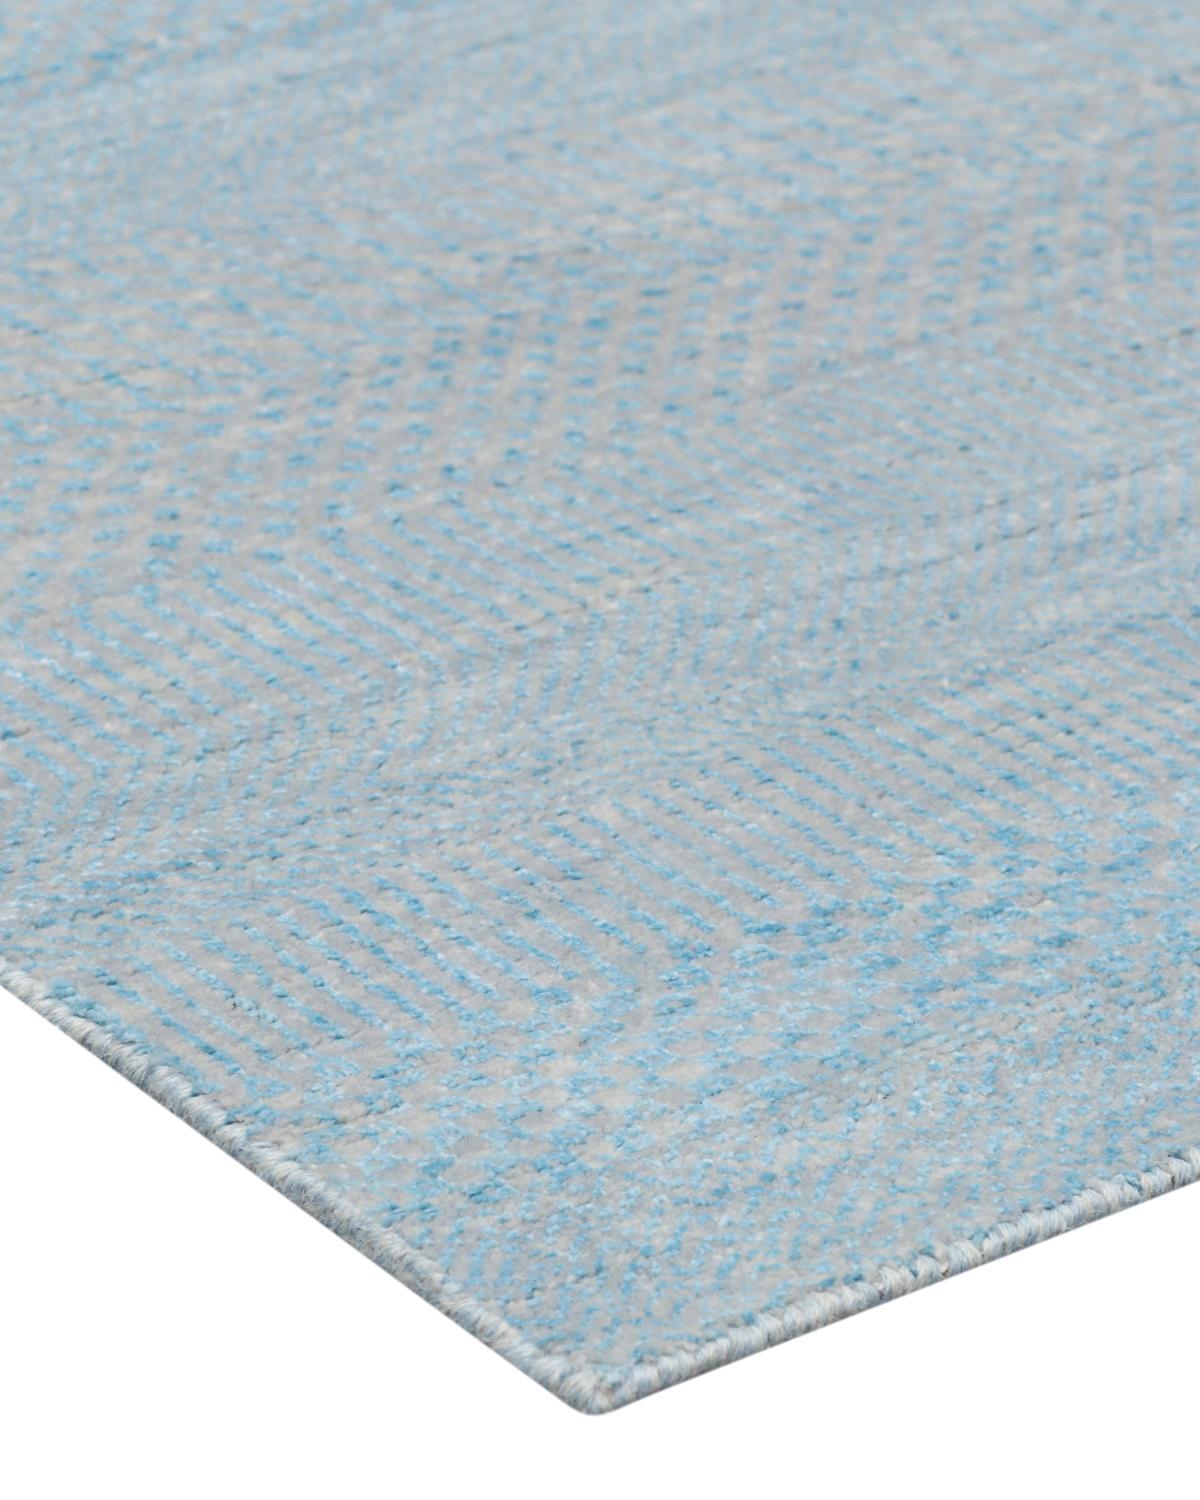 Color: Sky. Made in: India. Subtle tone-on-tone stripes give the solid collection a depth and sophistication all its own. These rugs can pull the disparate elements of a room into a beautifully cohesive whole; they can also introduce an unexpected